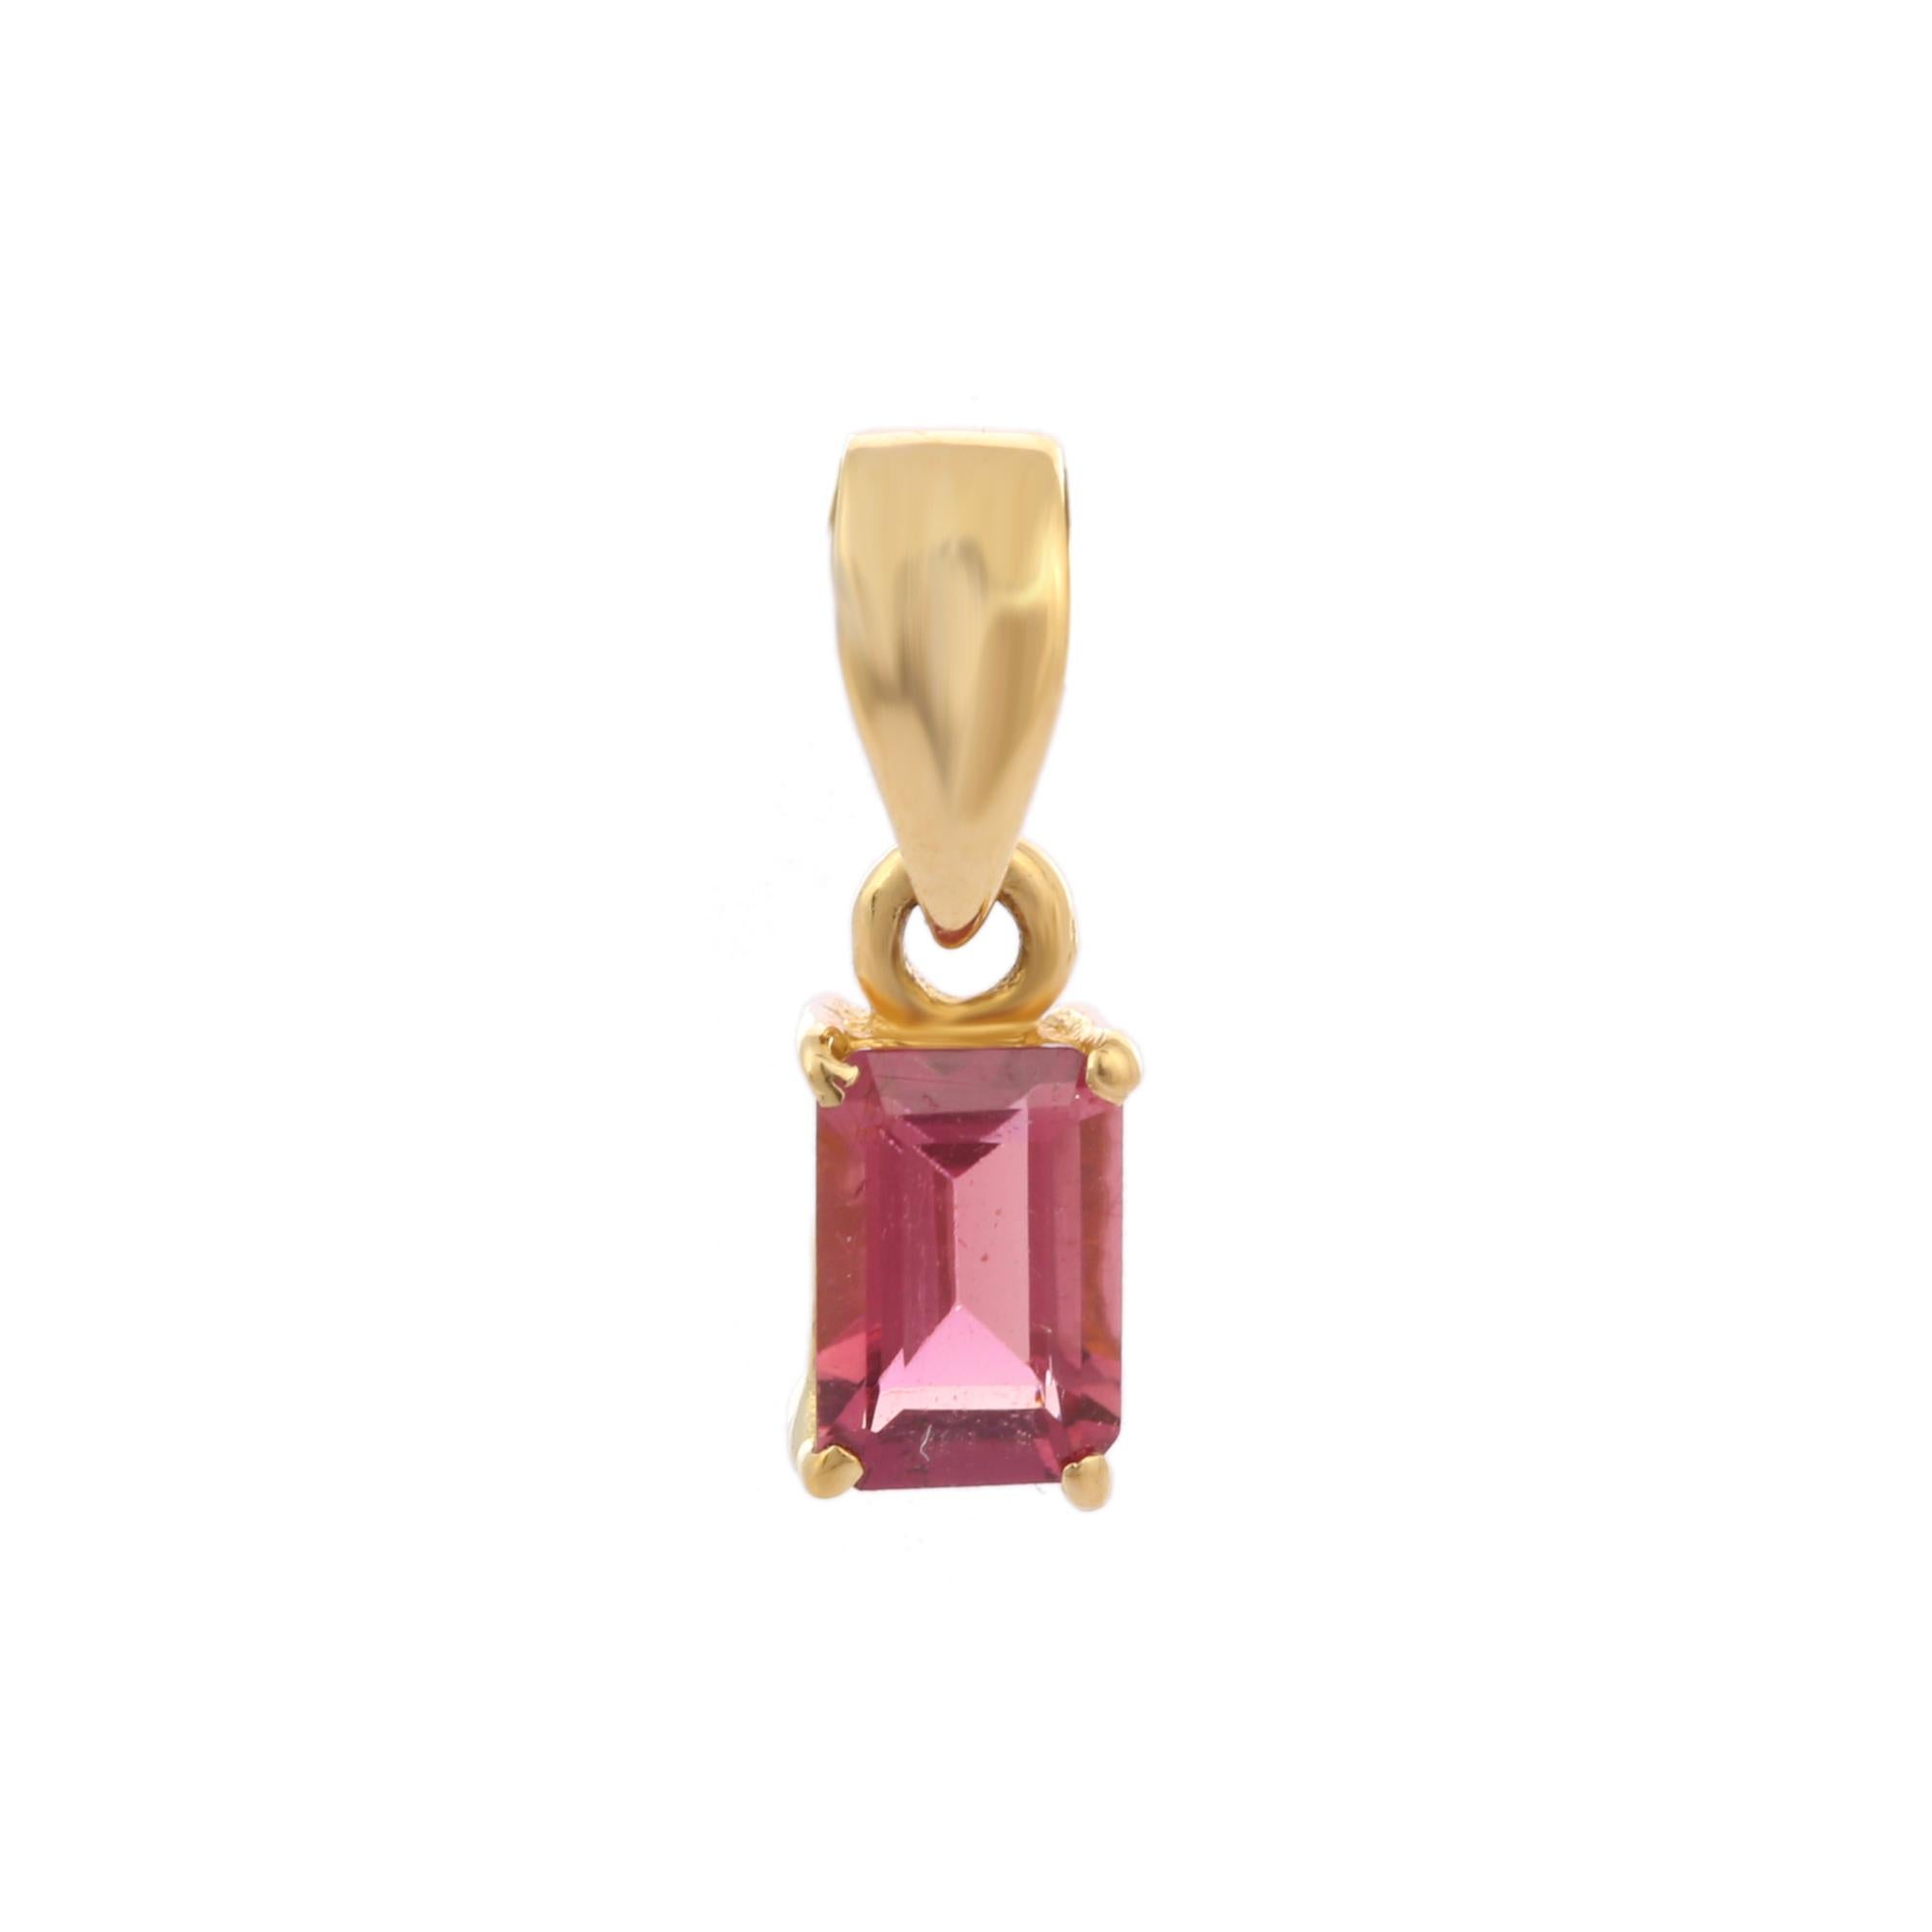 Pink sapphire pendant in 18K Gold. It has a octagon cut sapphire that completes your look with a decent touch. Pendants are used to wear or gifted to represent love and promises. It's an attractive jewelry piece that goes with every basic outfit and